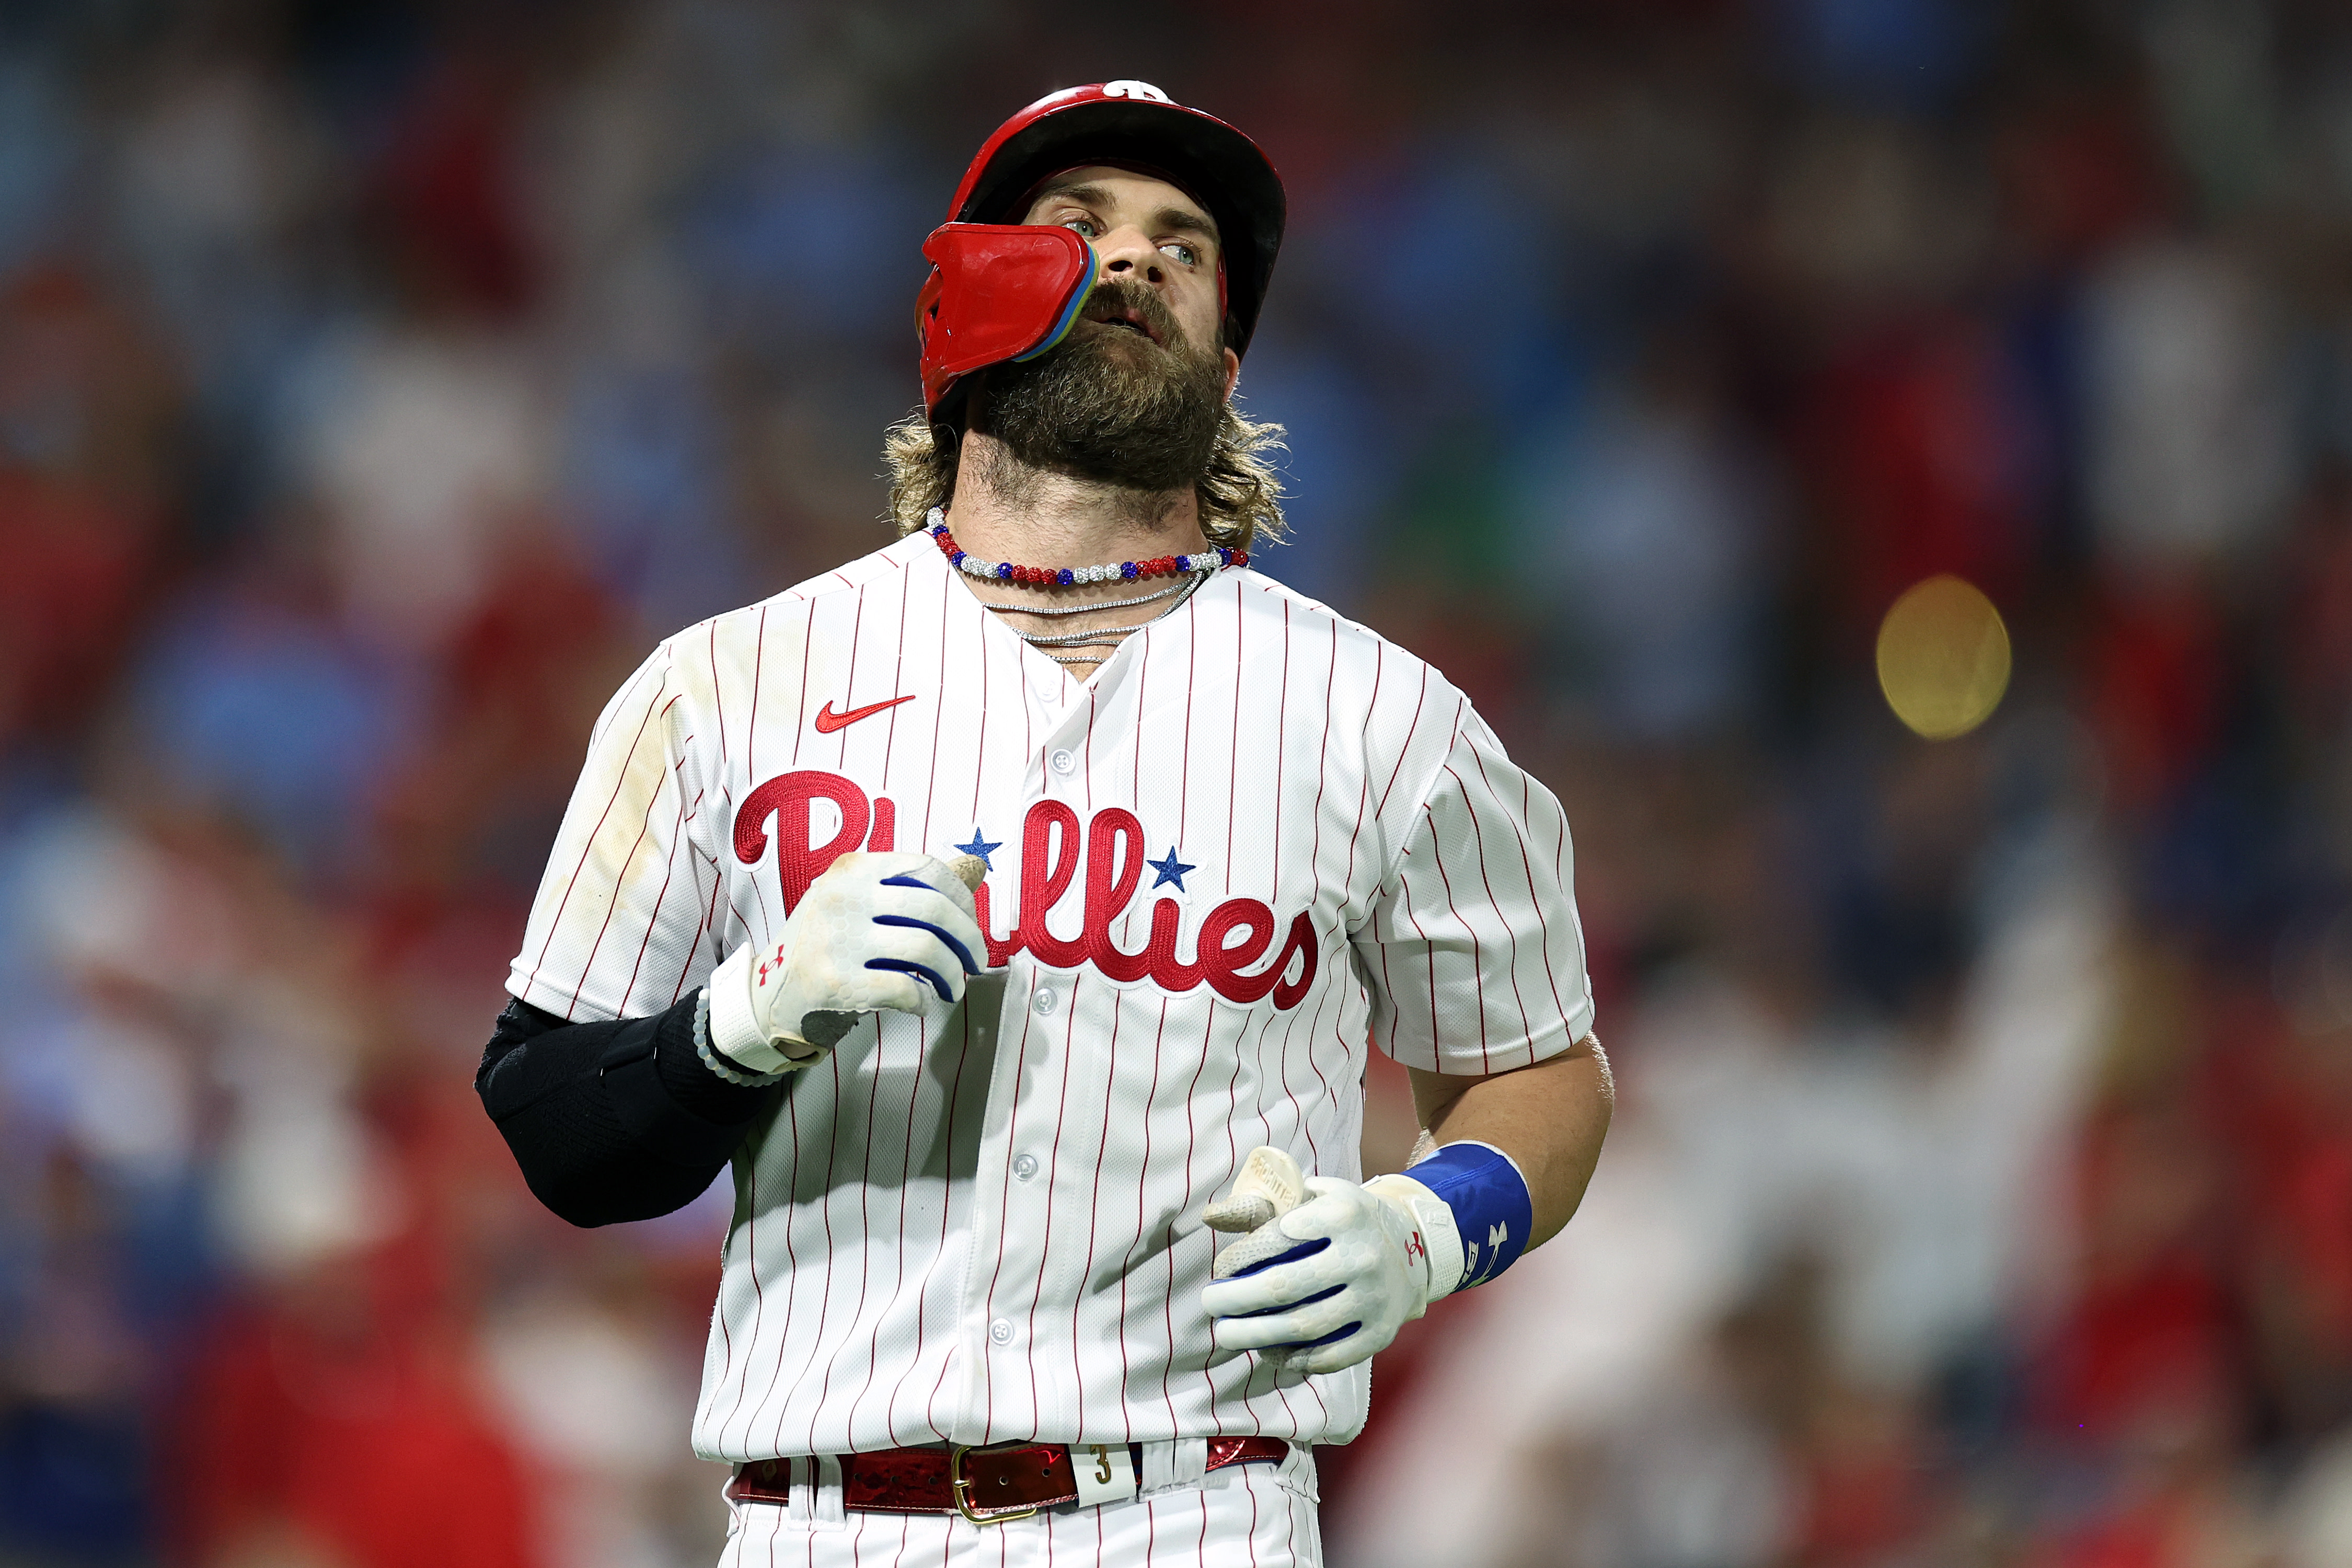 Did Phillies Bryce Harper take shot at Braves with 'Coach Prime